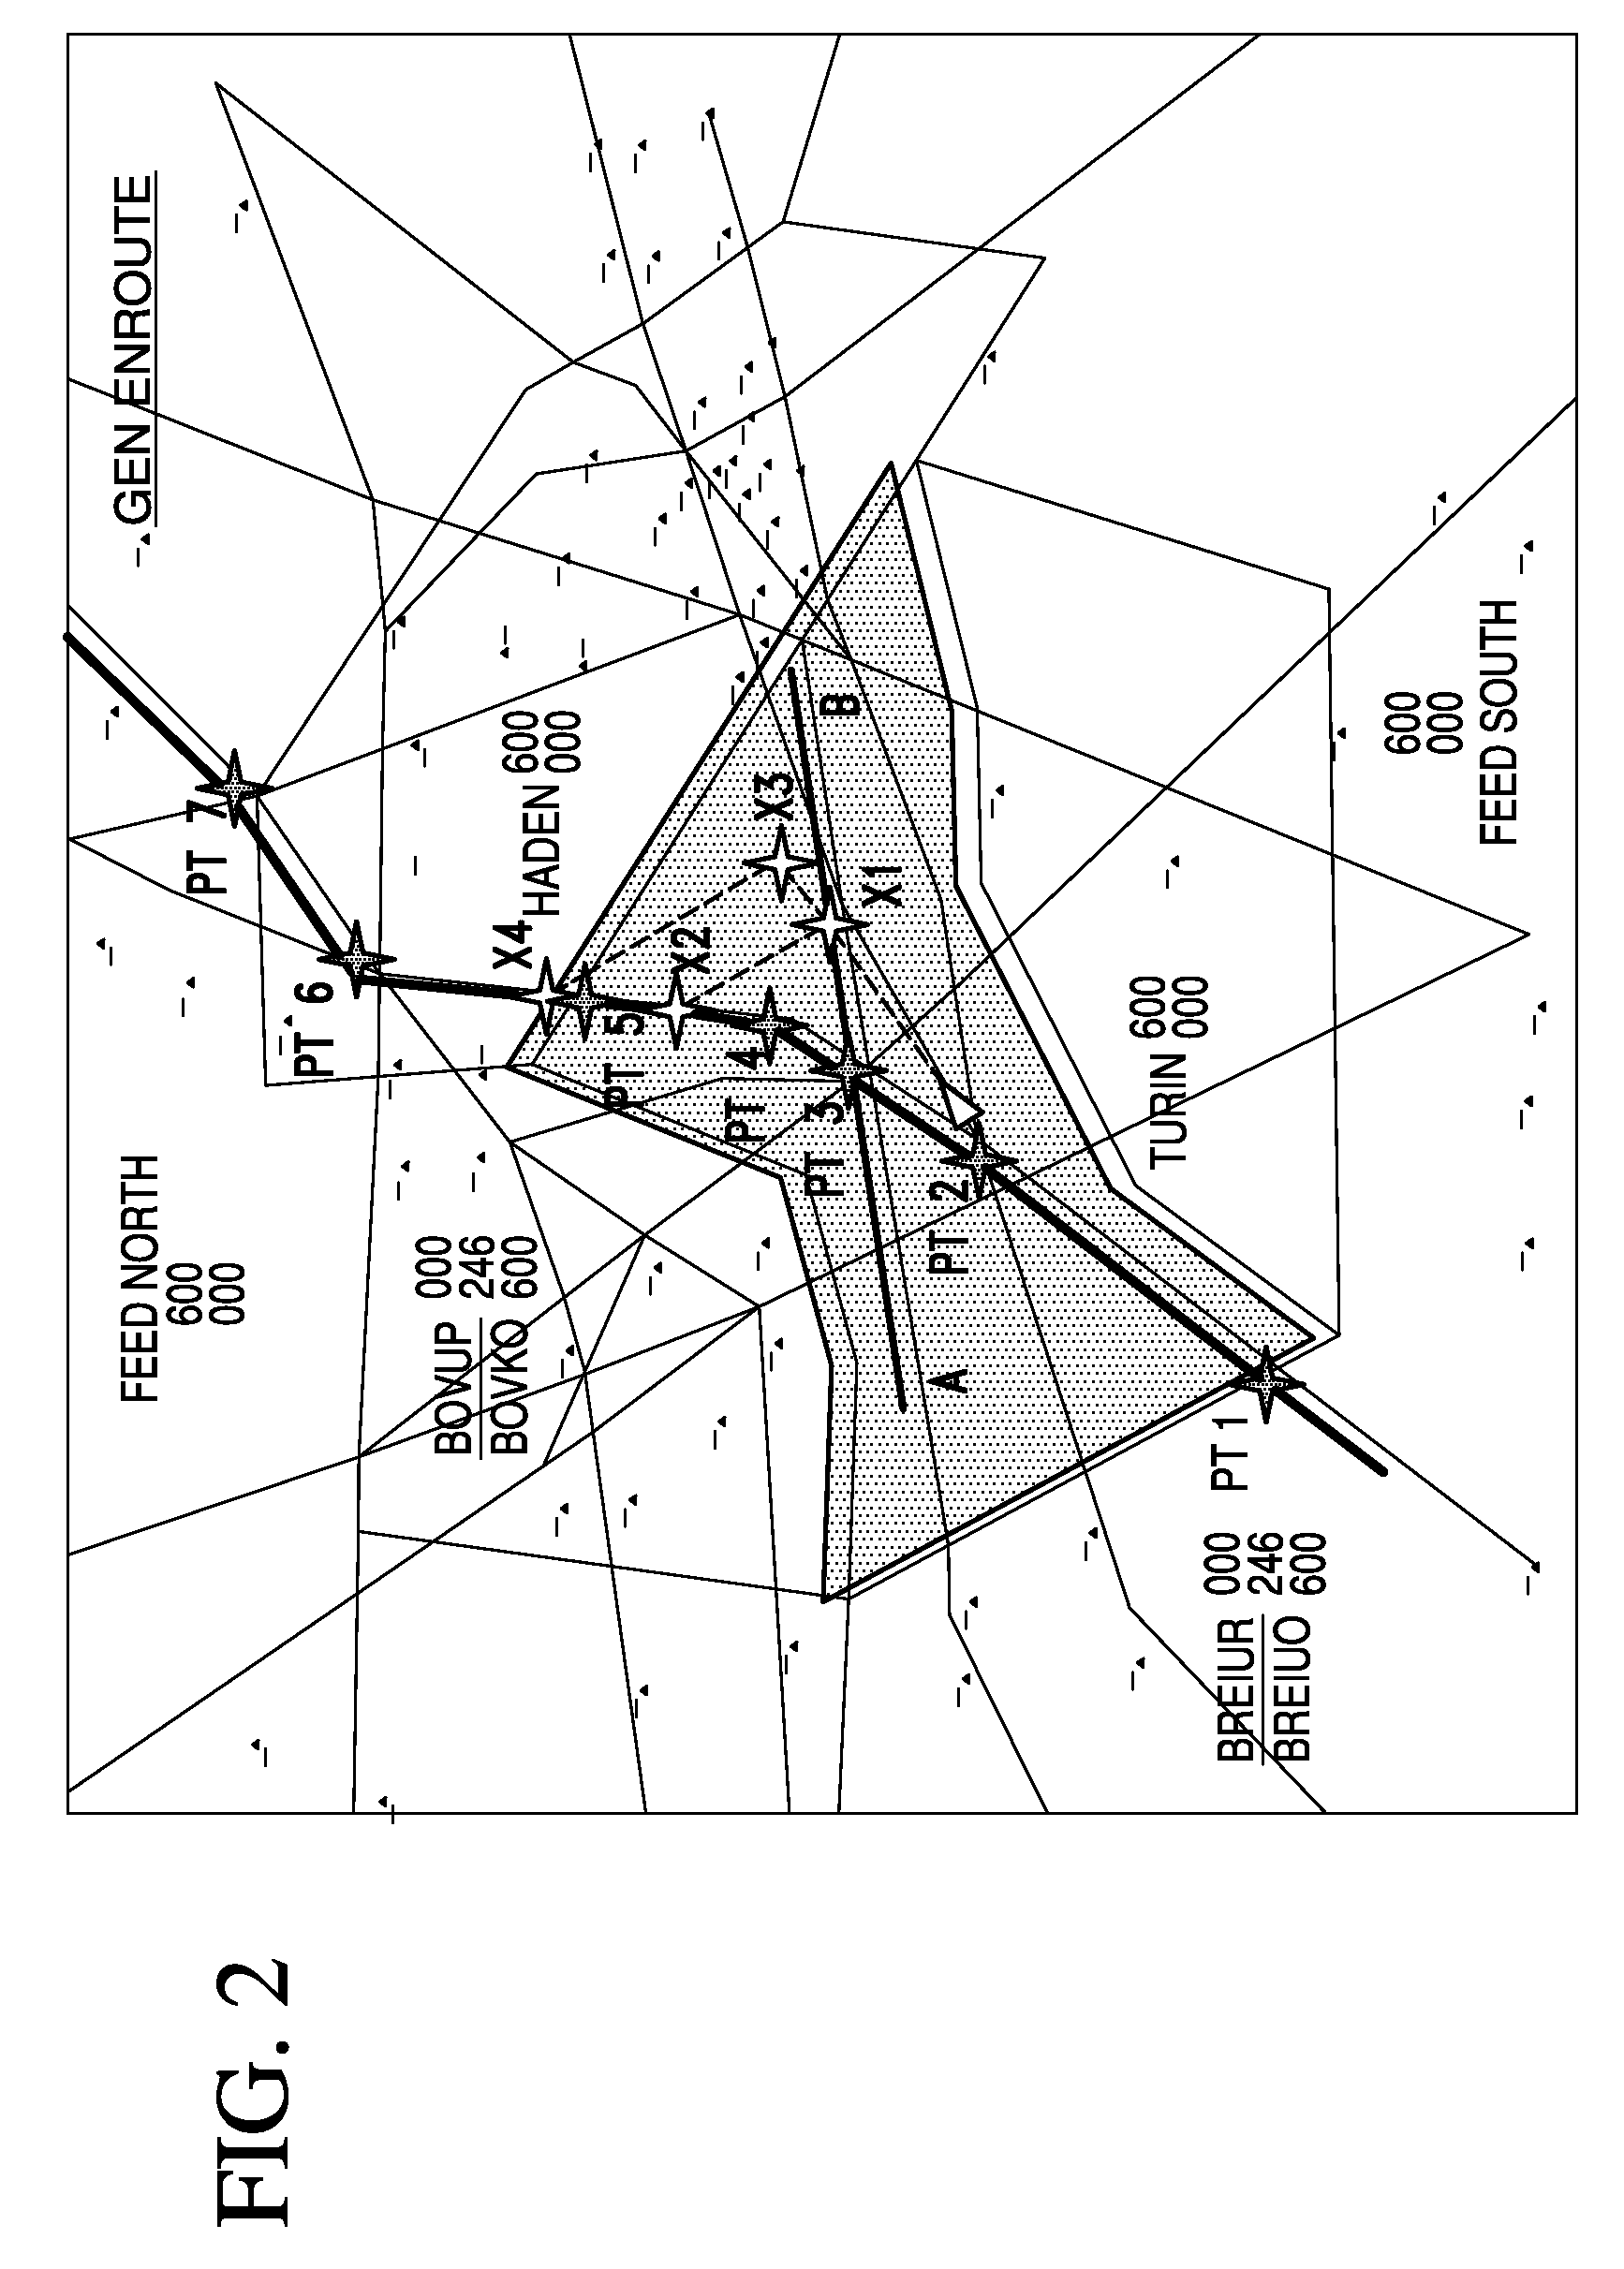 Method for improving route and 4D prediction calculations by FMS for ATC tactical instructions